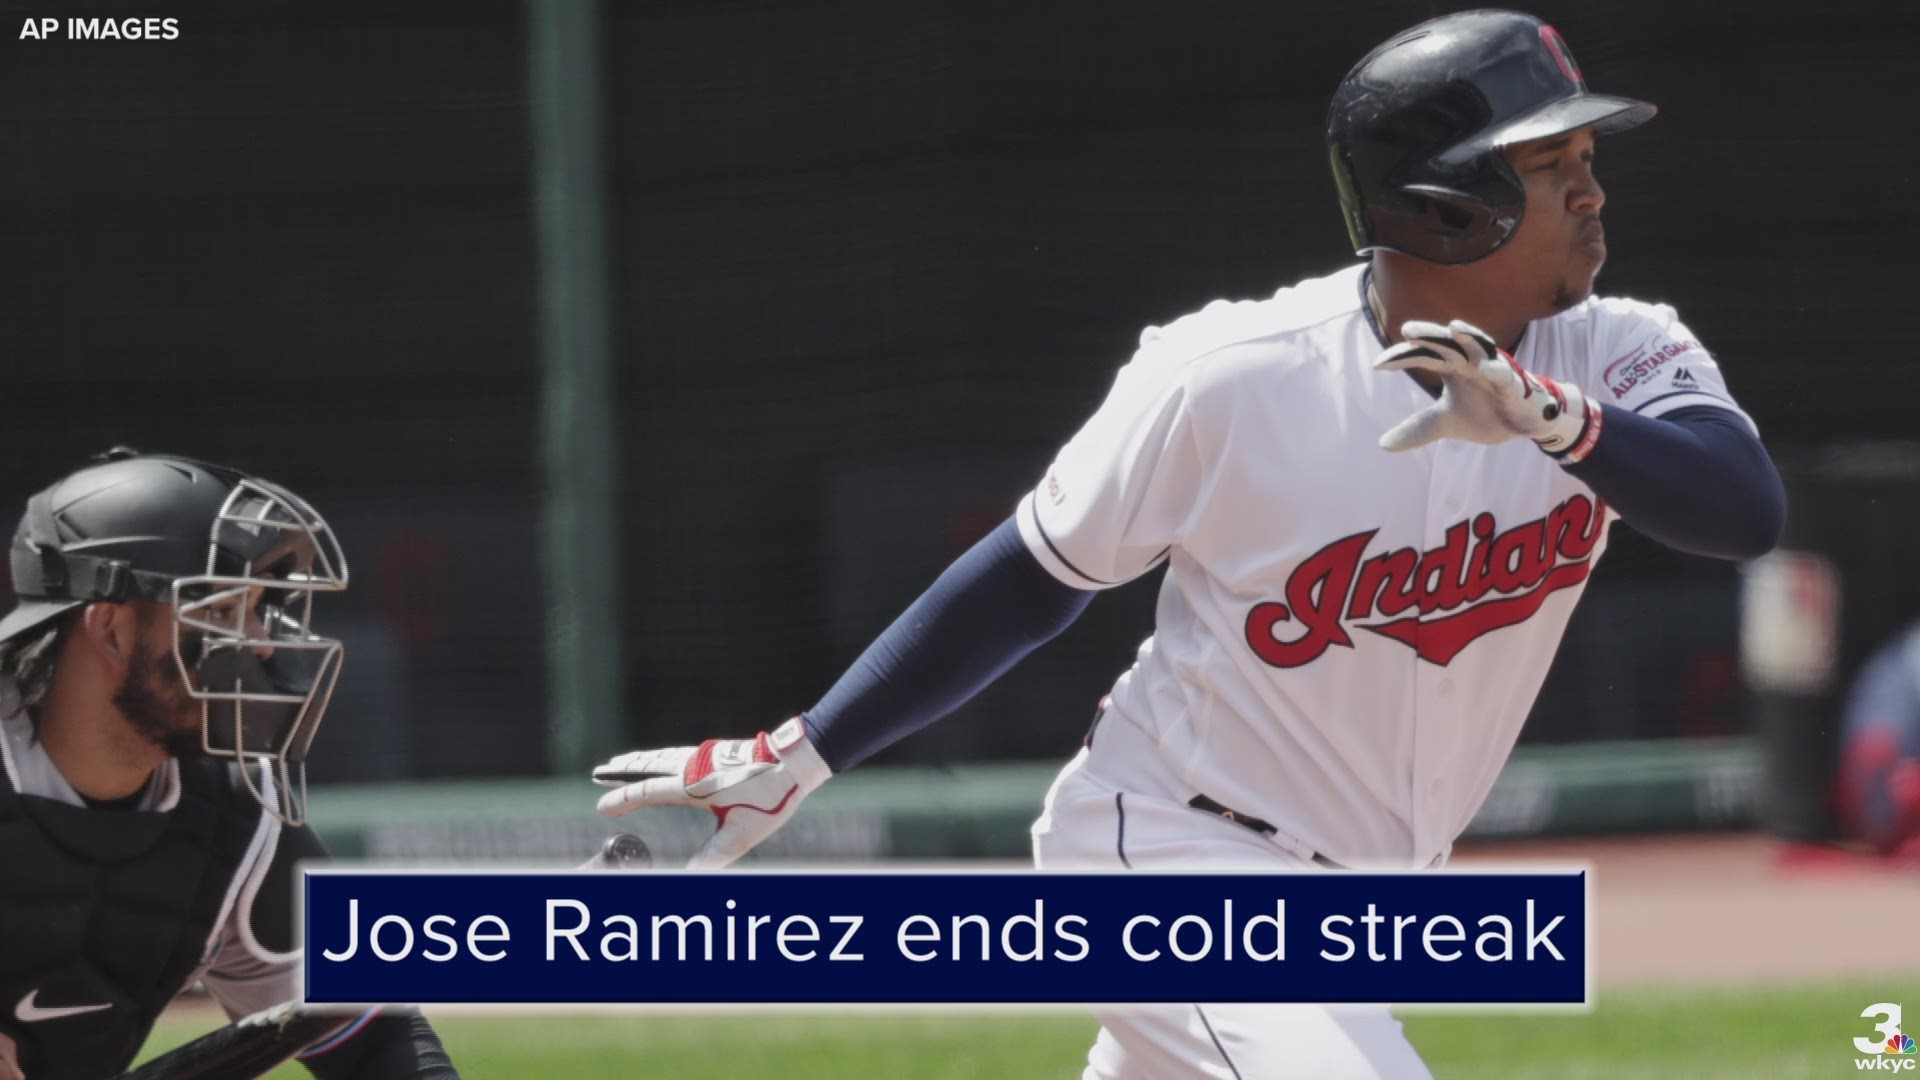 Jose Ramirez went 3-for-4 with a home run, a double and 4 RBIs in the Cleveland Indians' 6-2 win over the Miami Marlins.